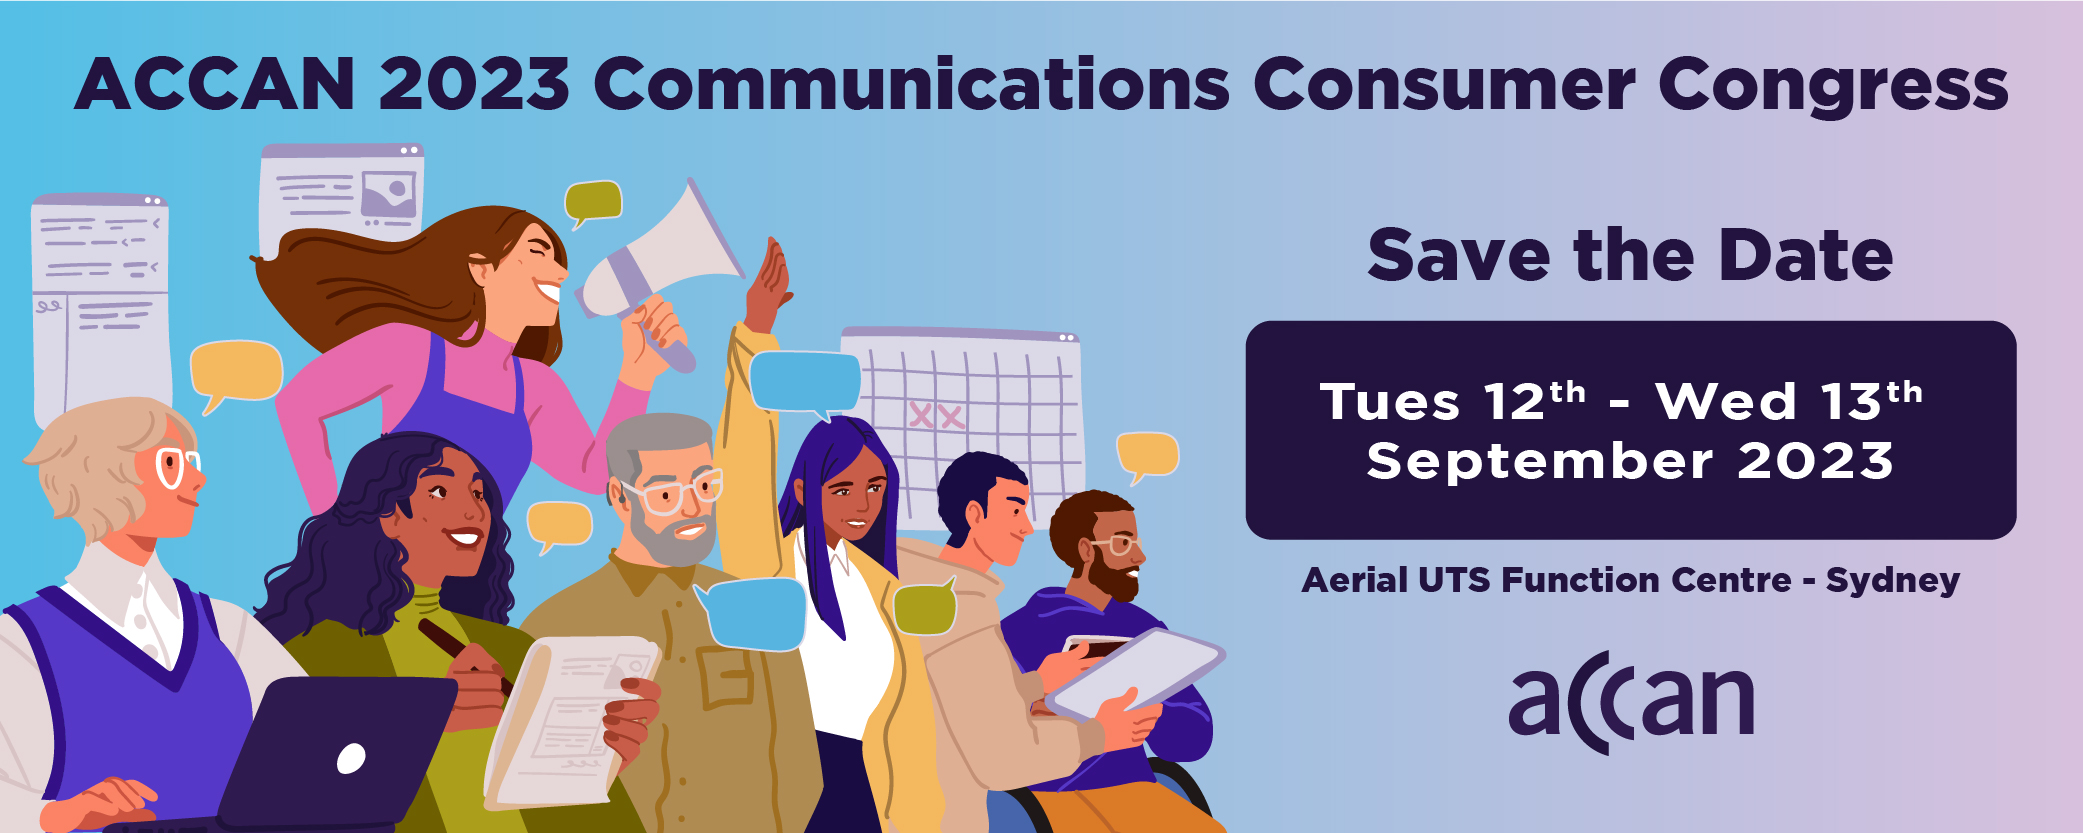 Communications Consumer Congress - Save the Date:  12th & 13th September 2023, Sydney.